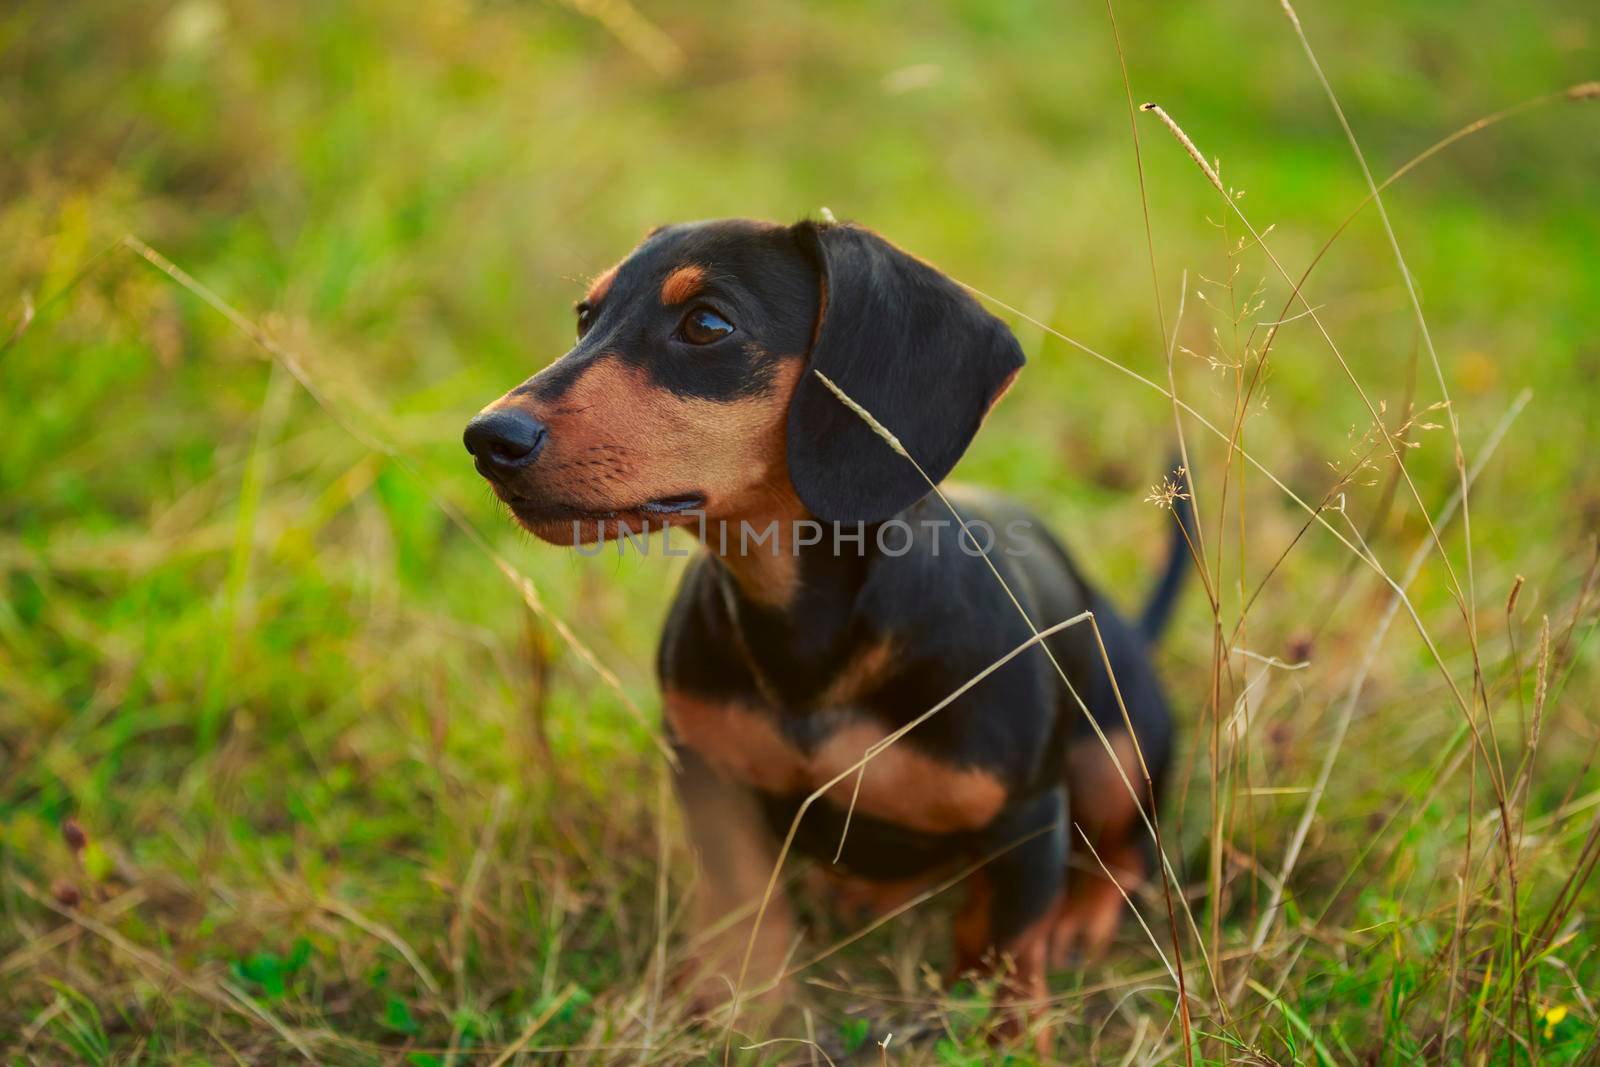 Dachshund dog stands in the grass and looks out for something